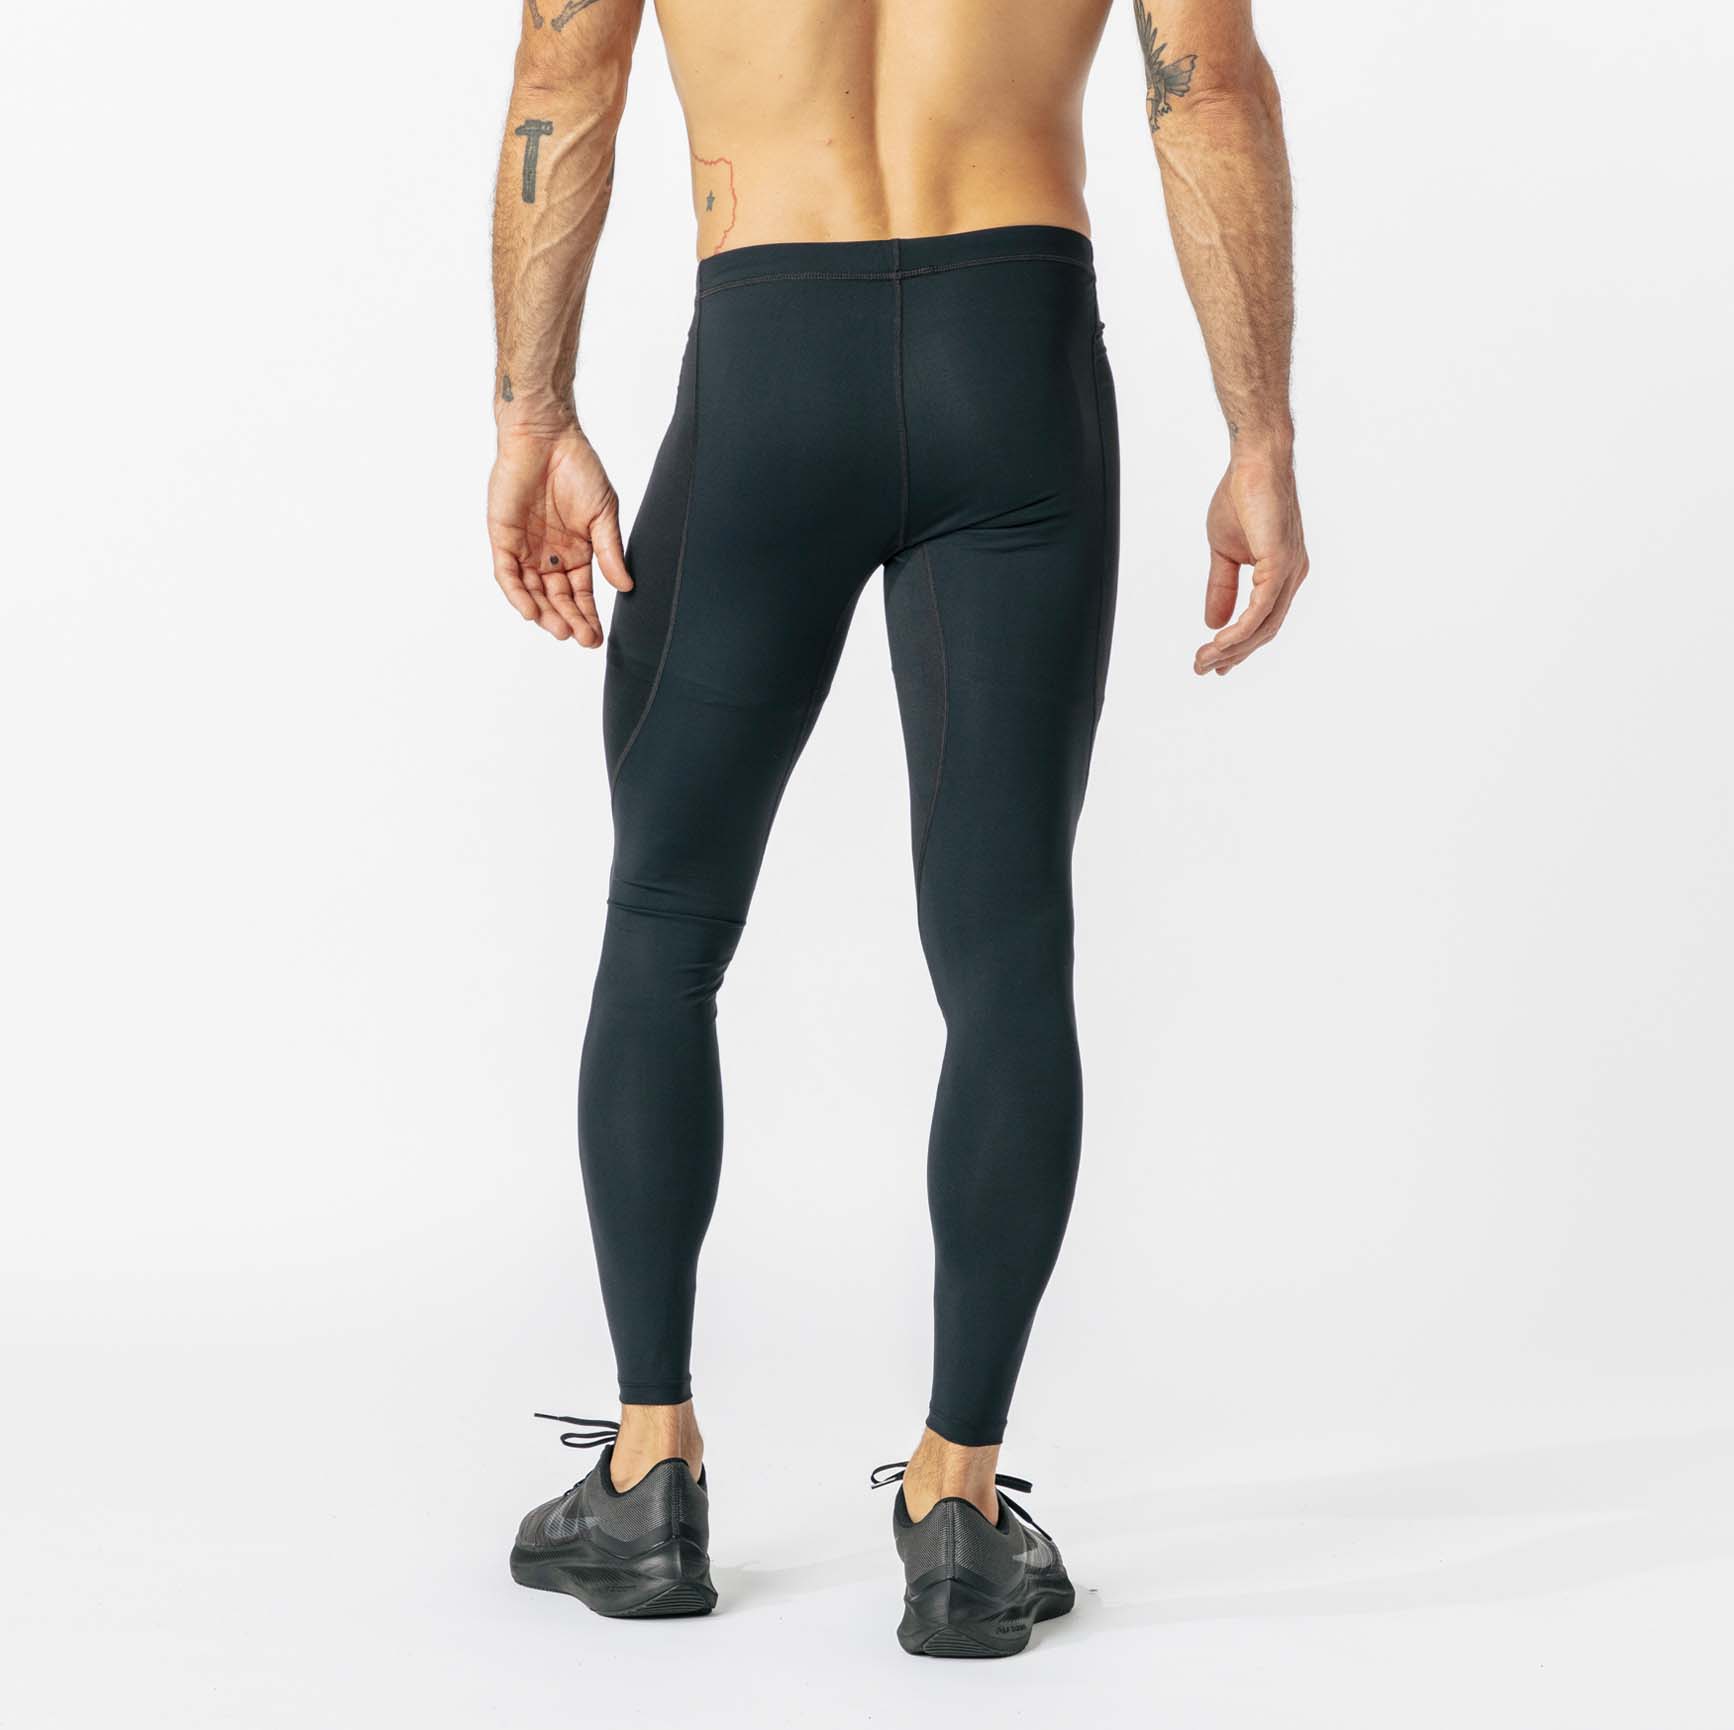 Men's Compression Pants With Pockets, Workout Athletic Tights Leggings  Athletic Base Layer Underwear